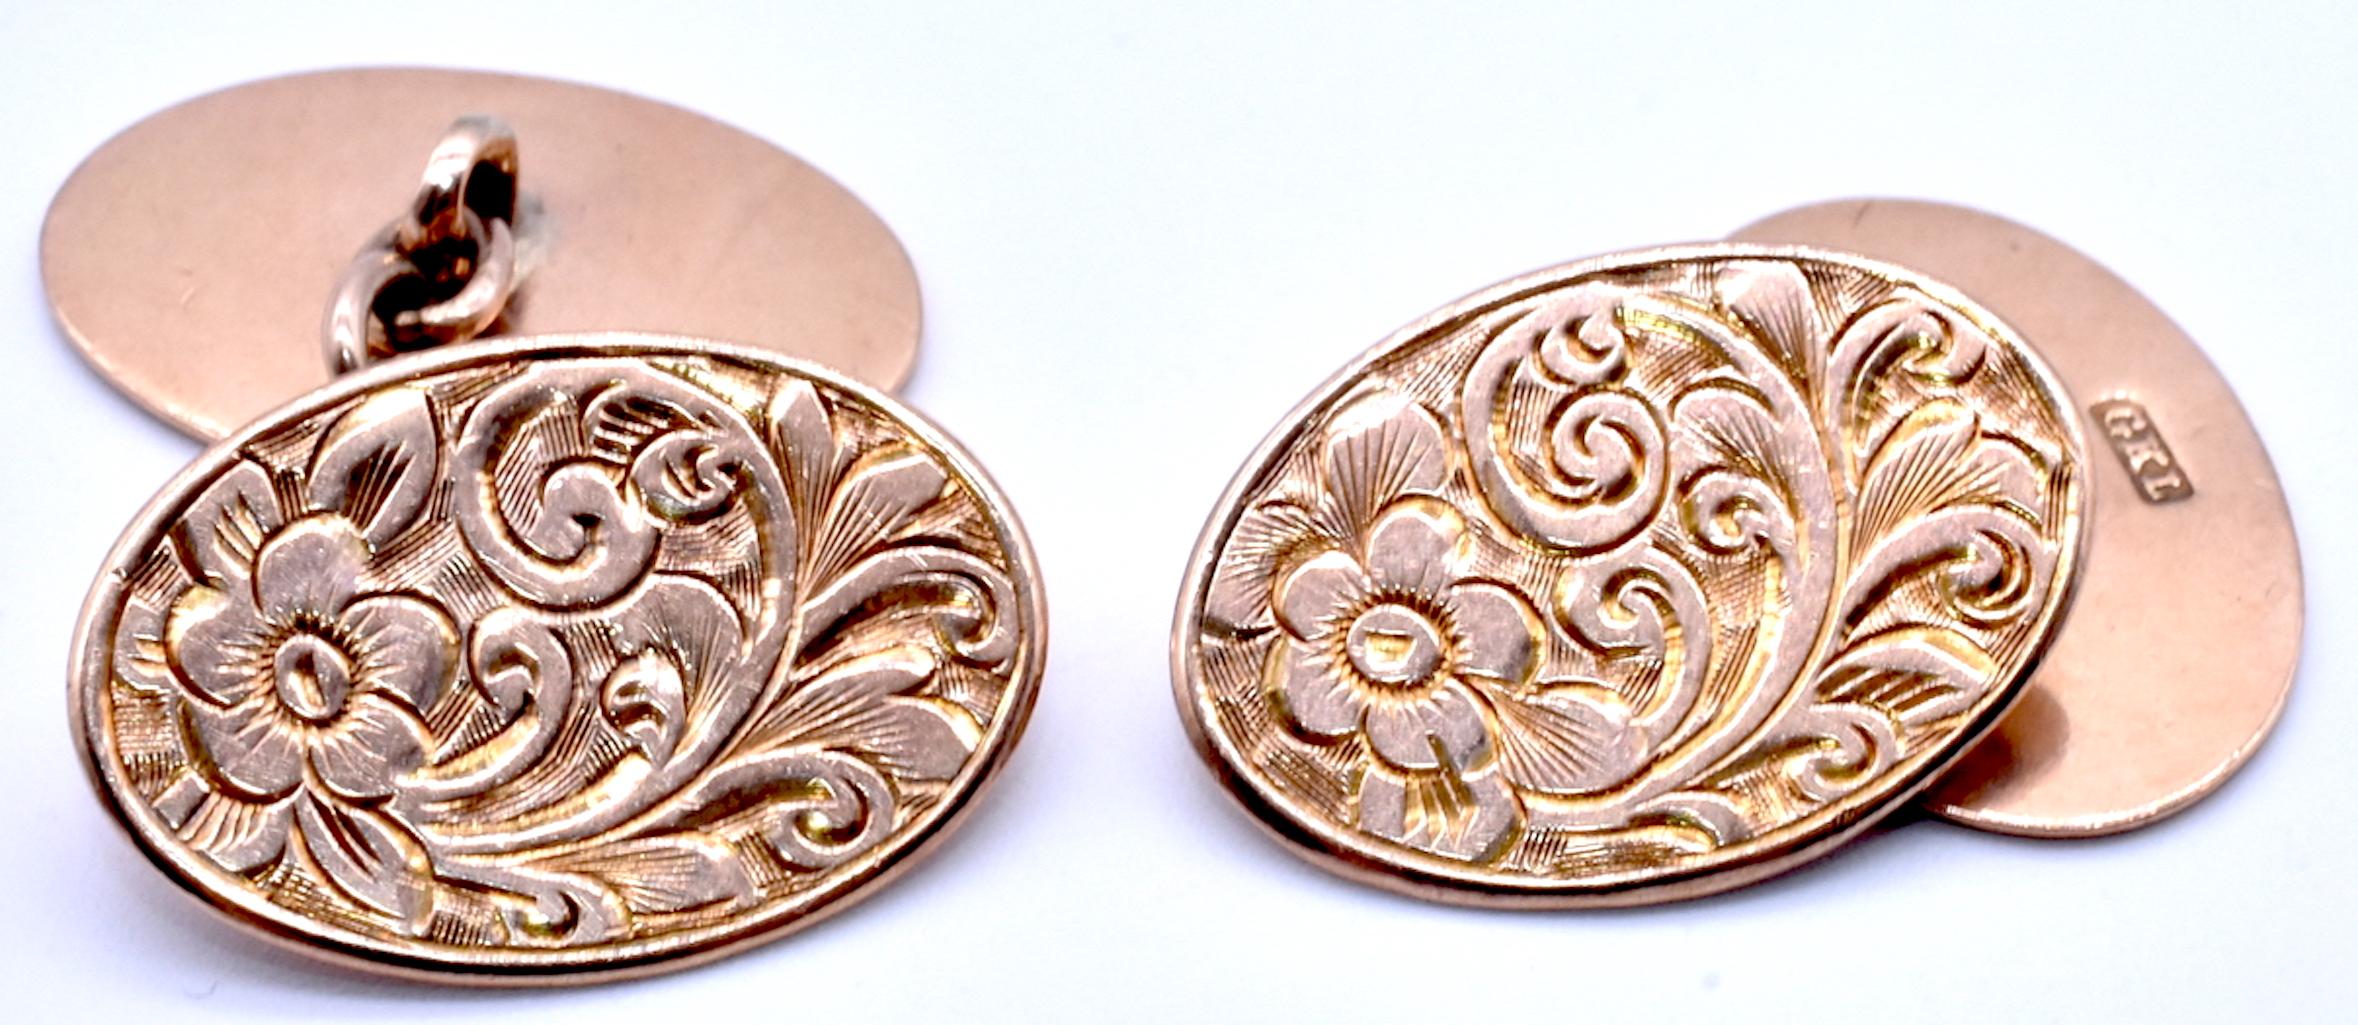 Antique Art Nouveau Floral Engraved 9K gold cufflinks hallmarked 1908, a great gift for that special French Cuff Guy.